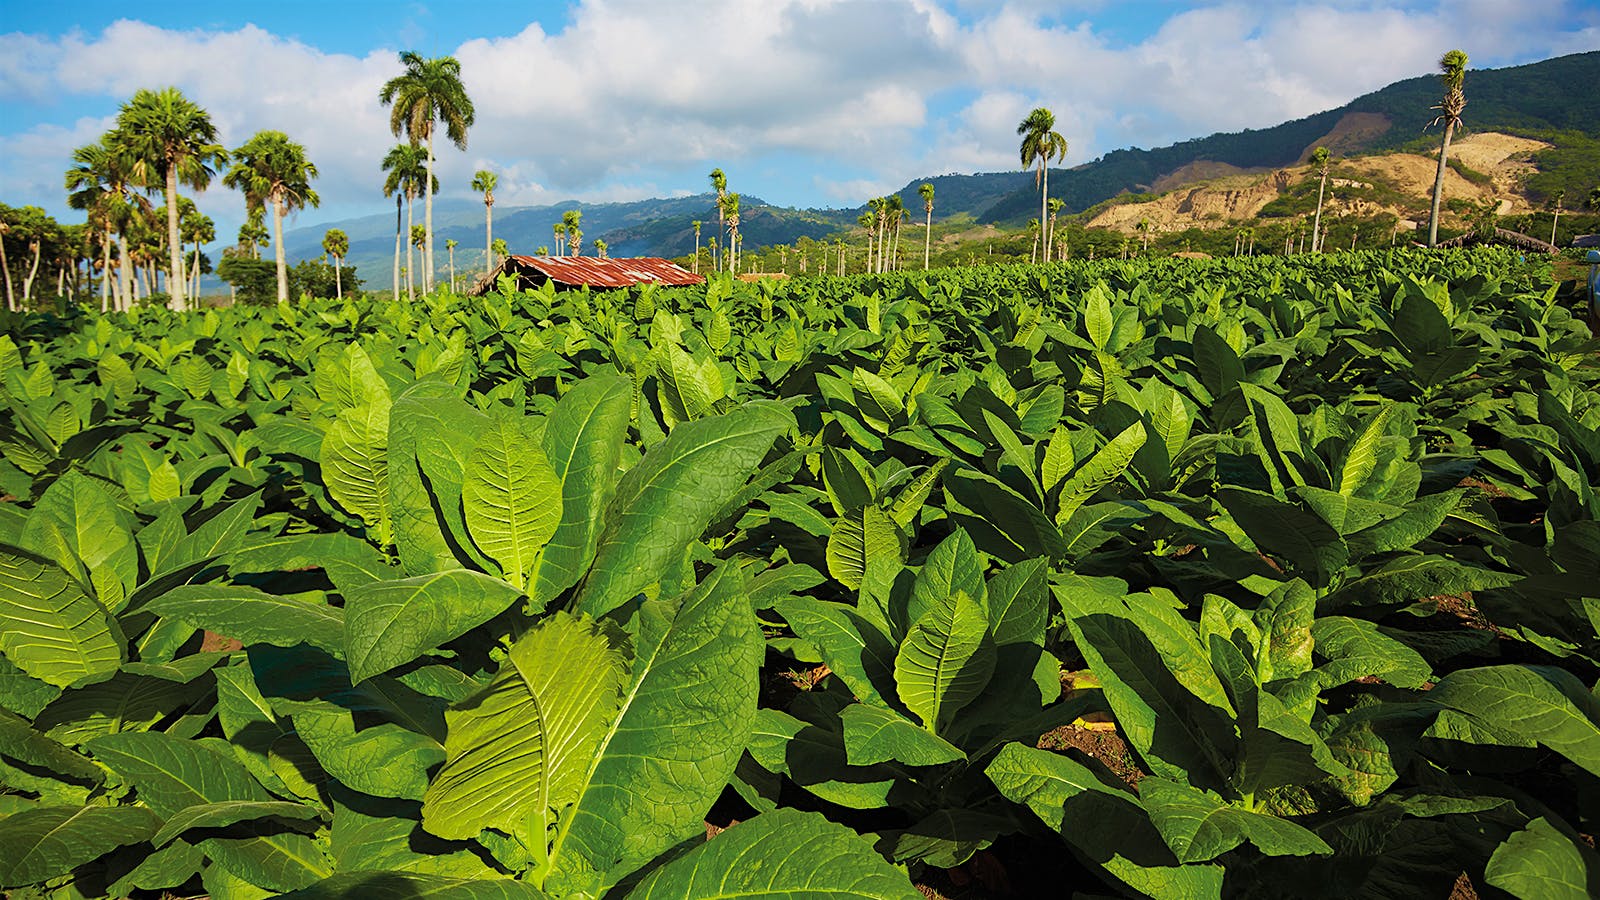 A field of sun-grown tobacco flourishes in a valley in the Dominican Republic. The crops grow from natural fertilizer.